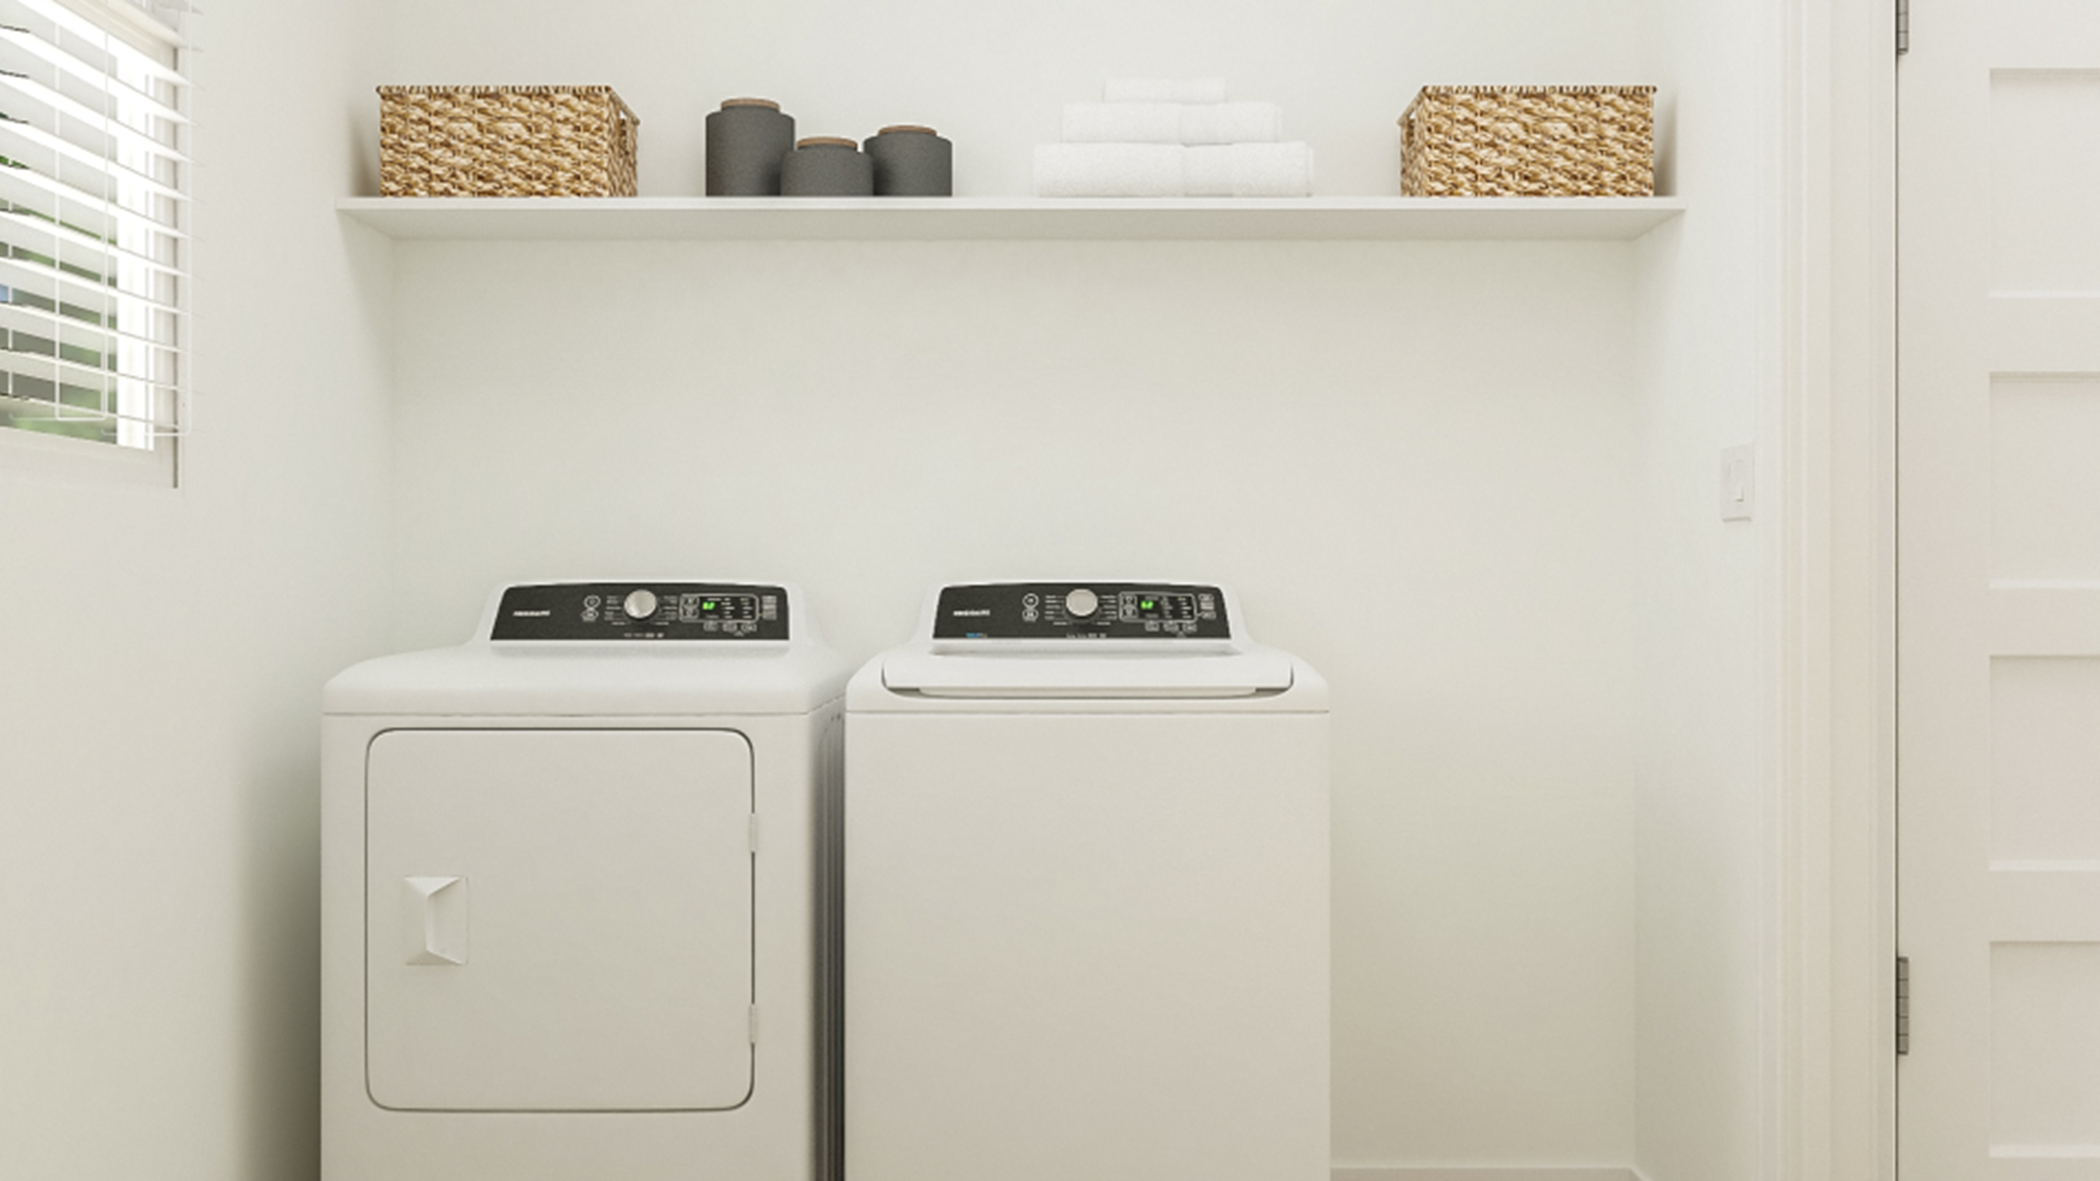 Laundry room with a washer and dryer